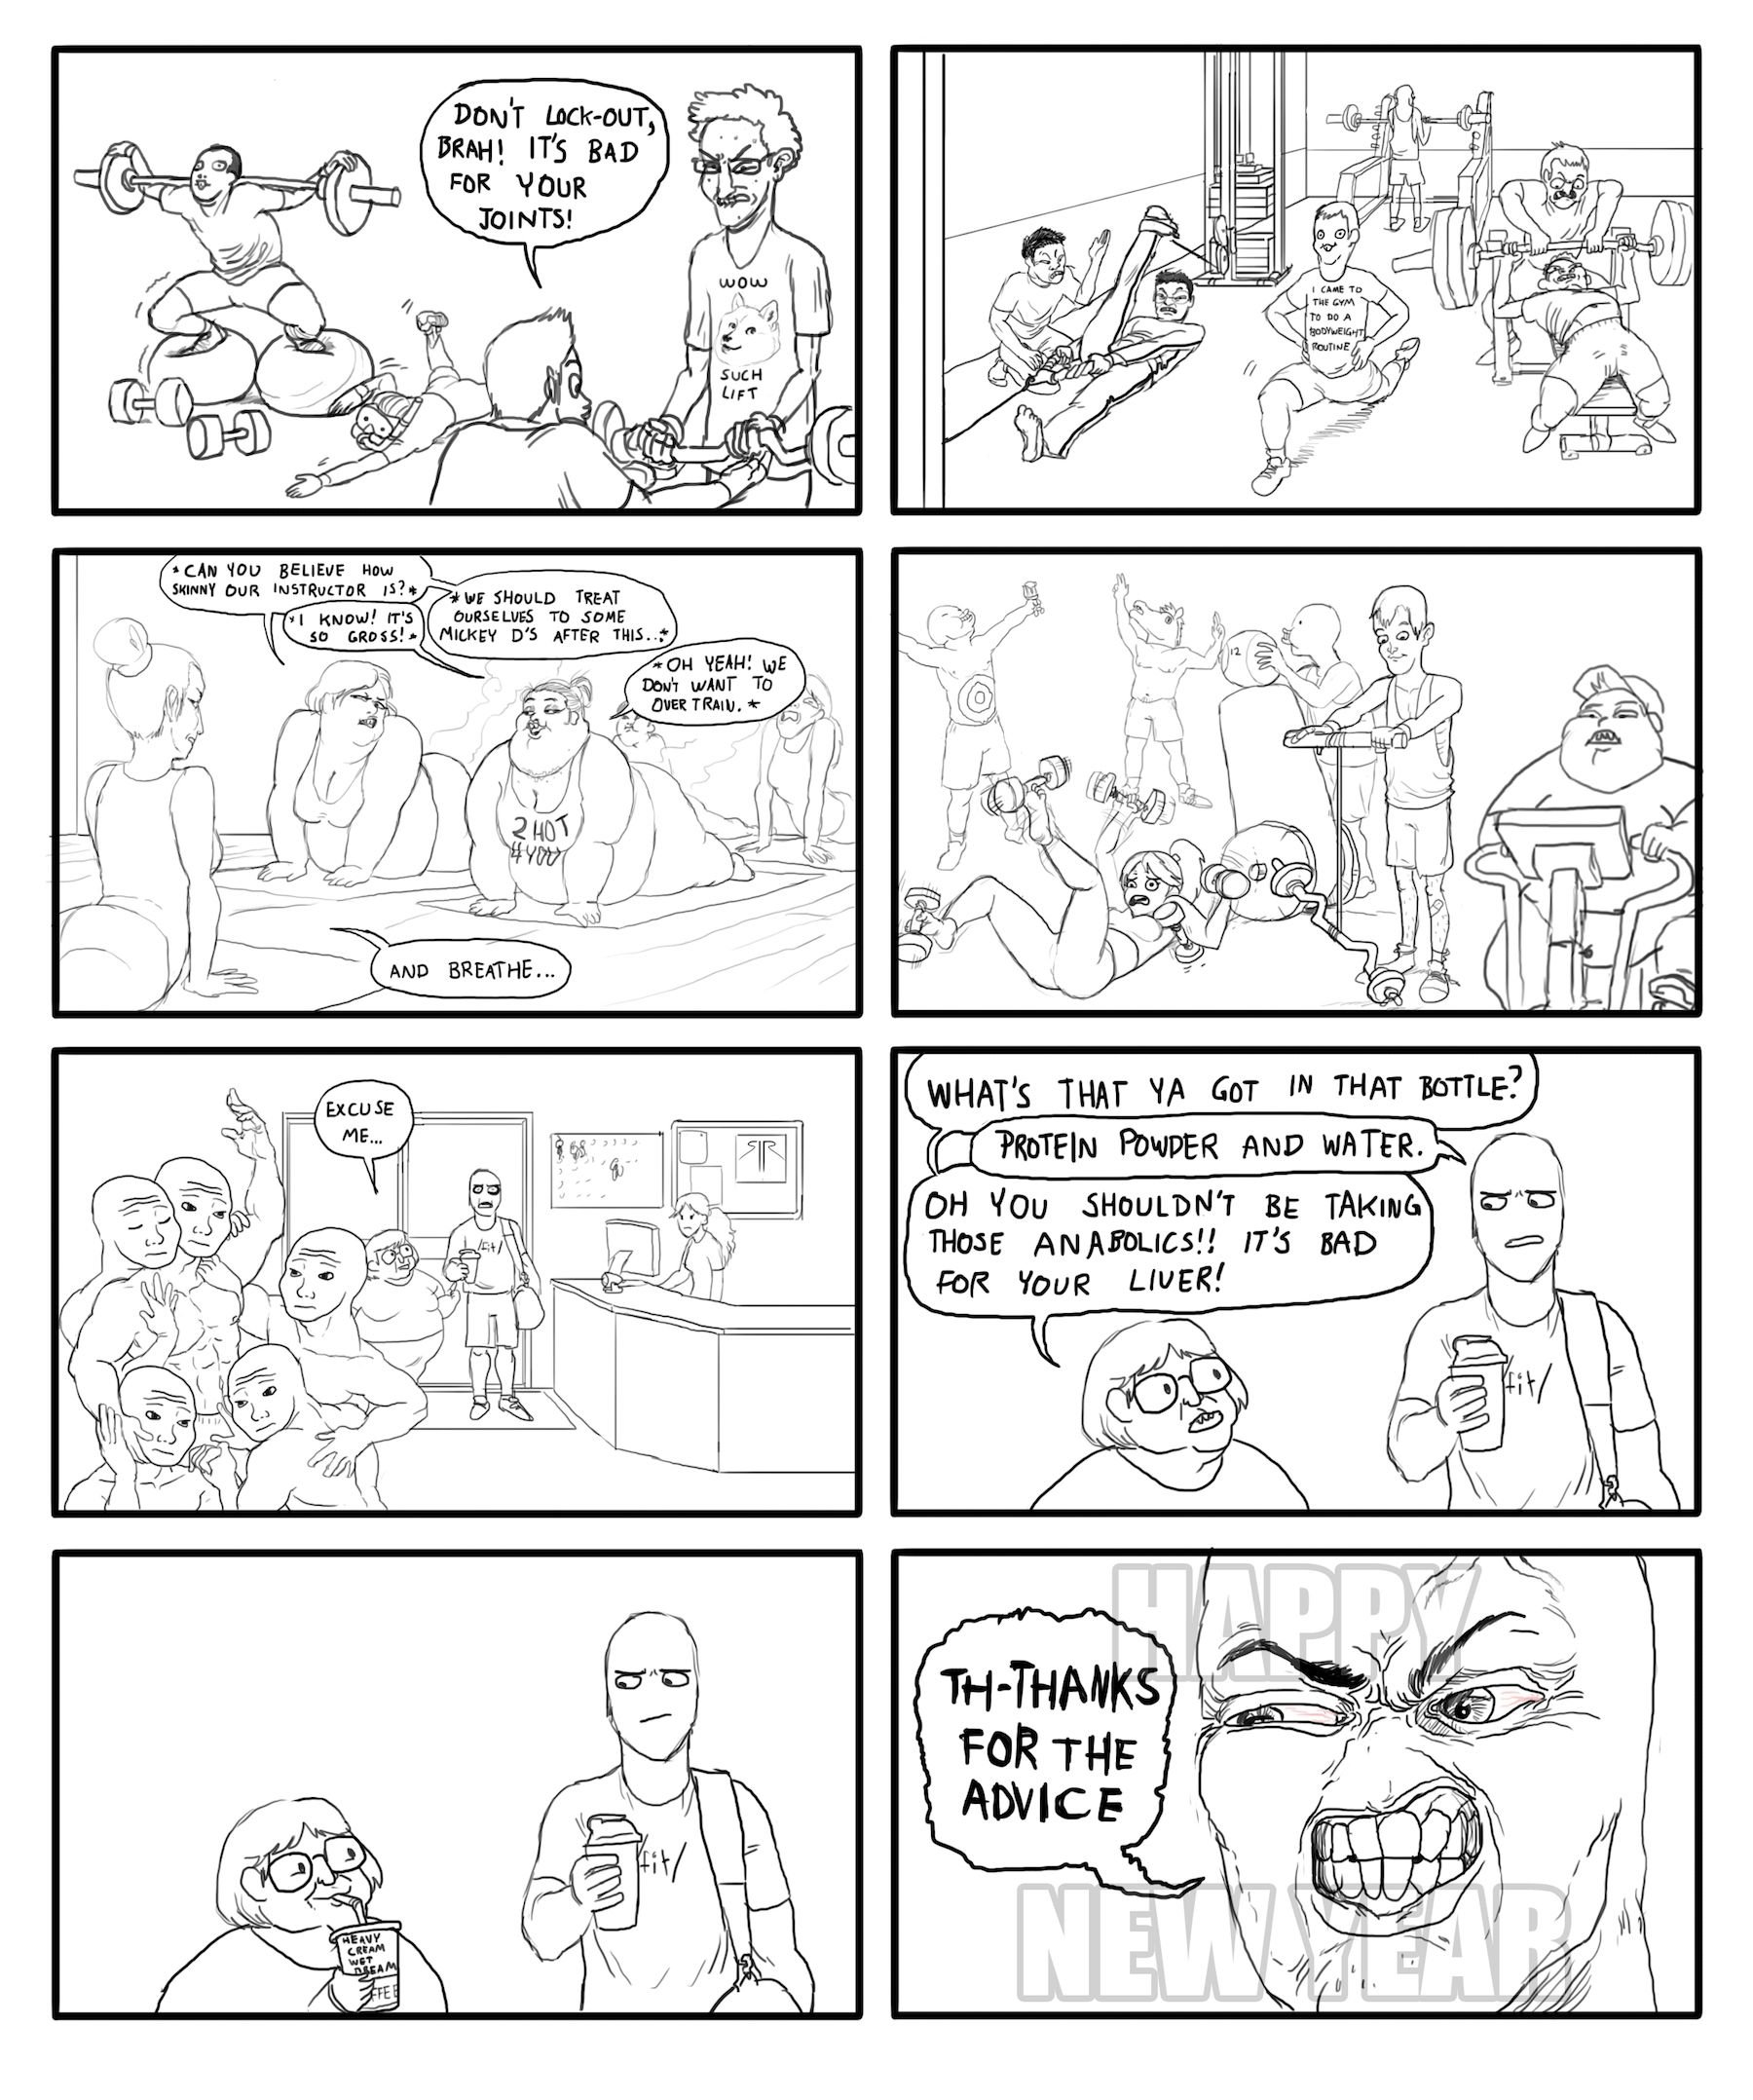 new years resolutioners at the gym comic